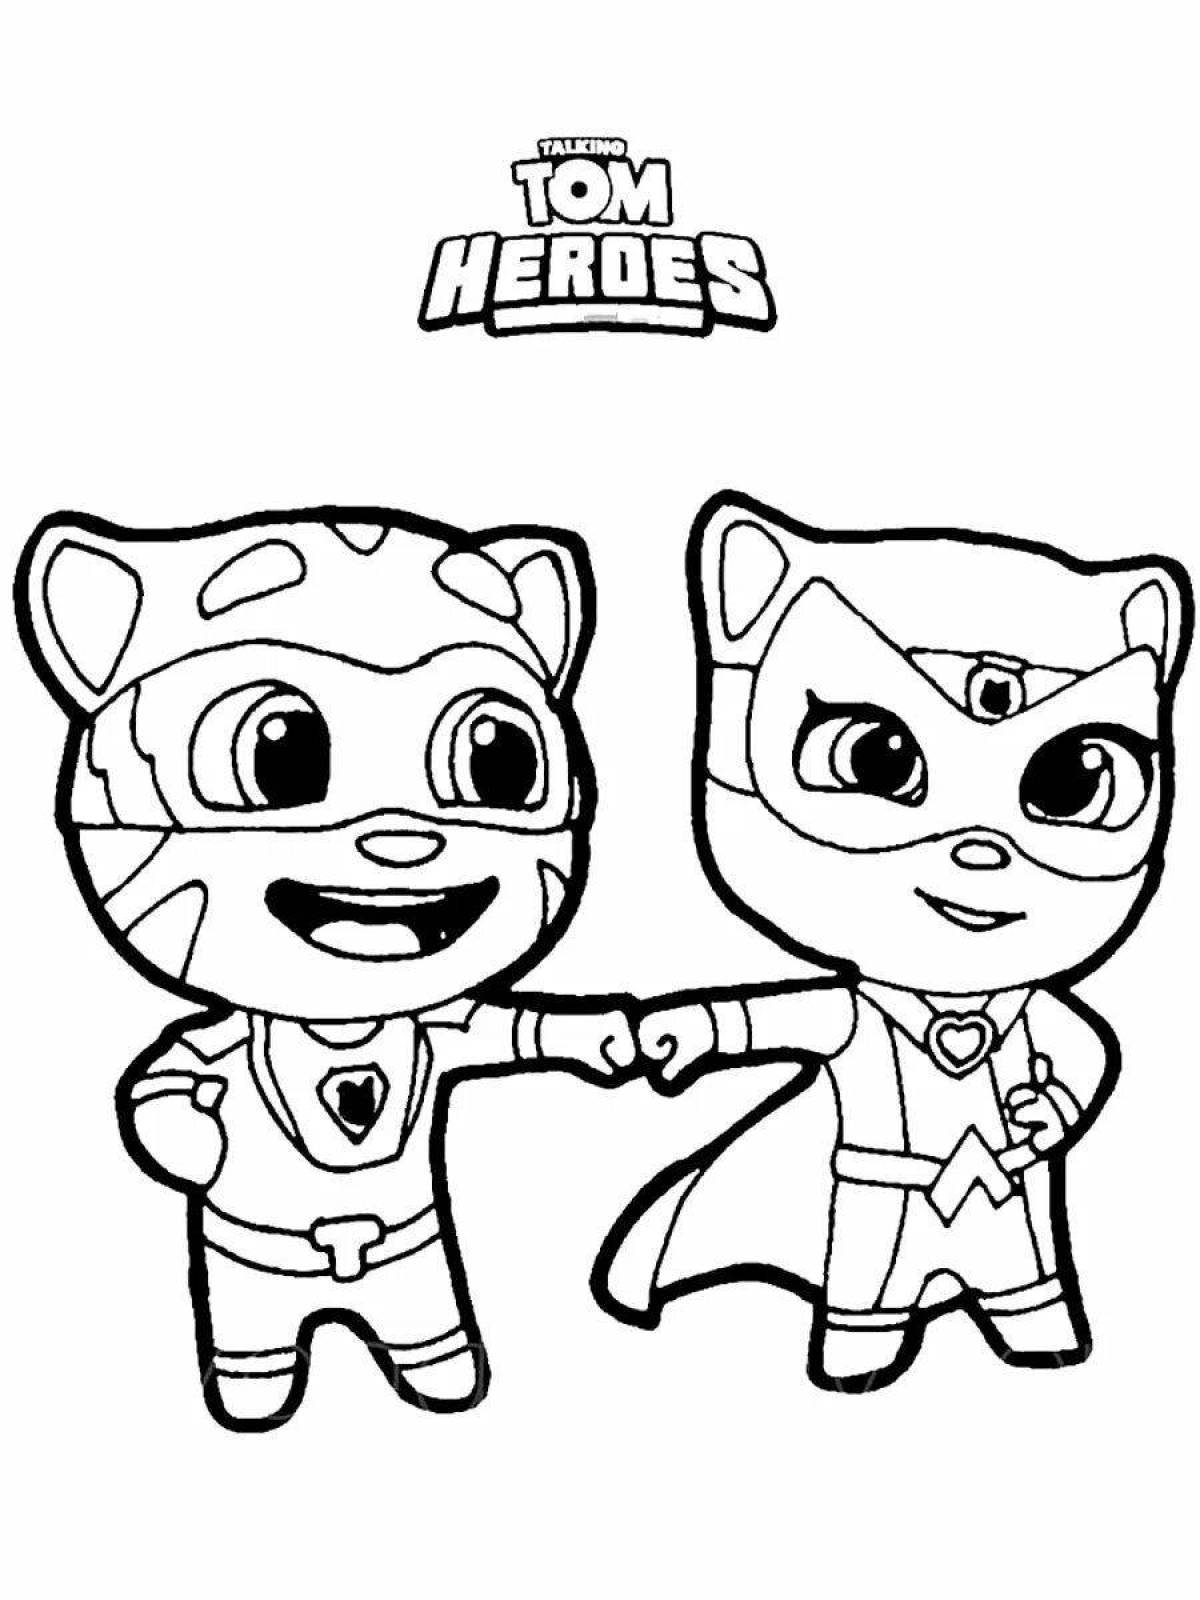 Magic tom and angela coloring pages for kids